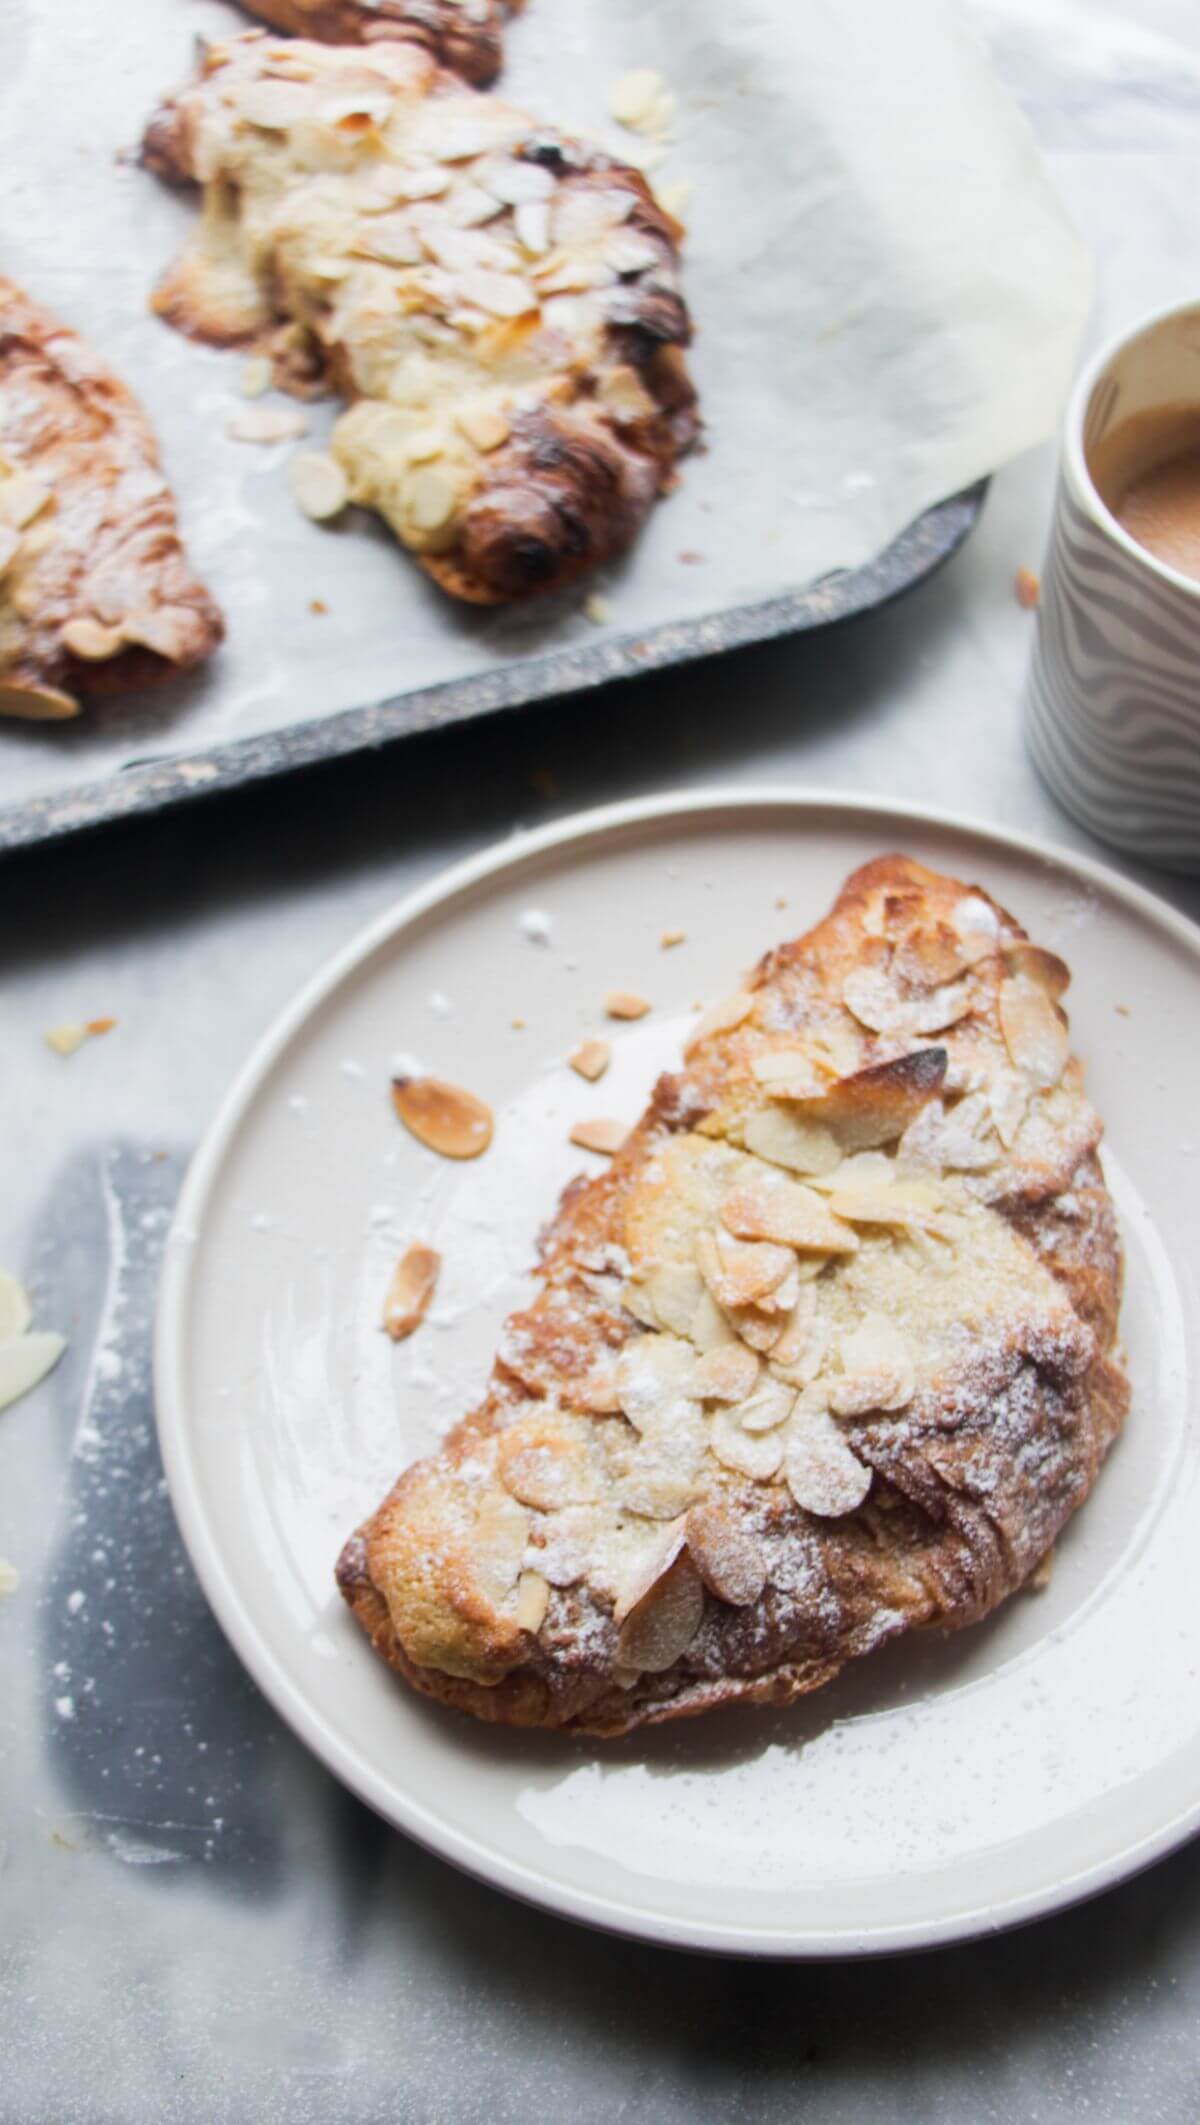 An almond croissant on a small white plate with a coffee and tray of croissants on the side.